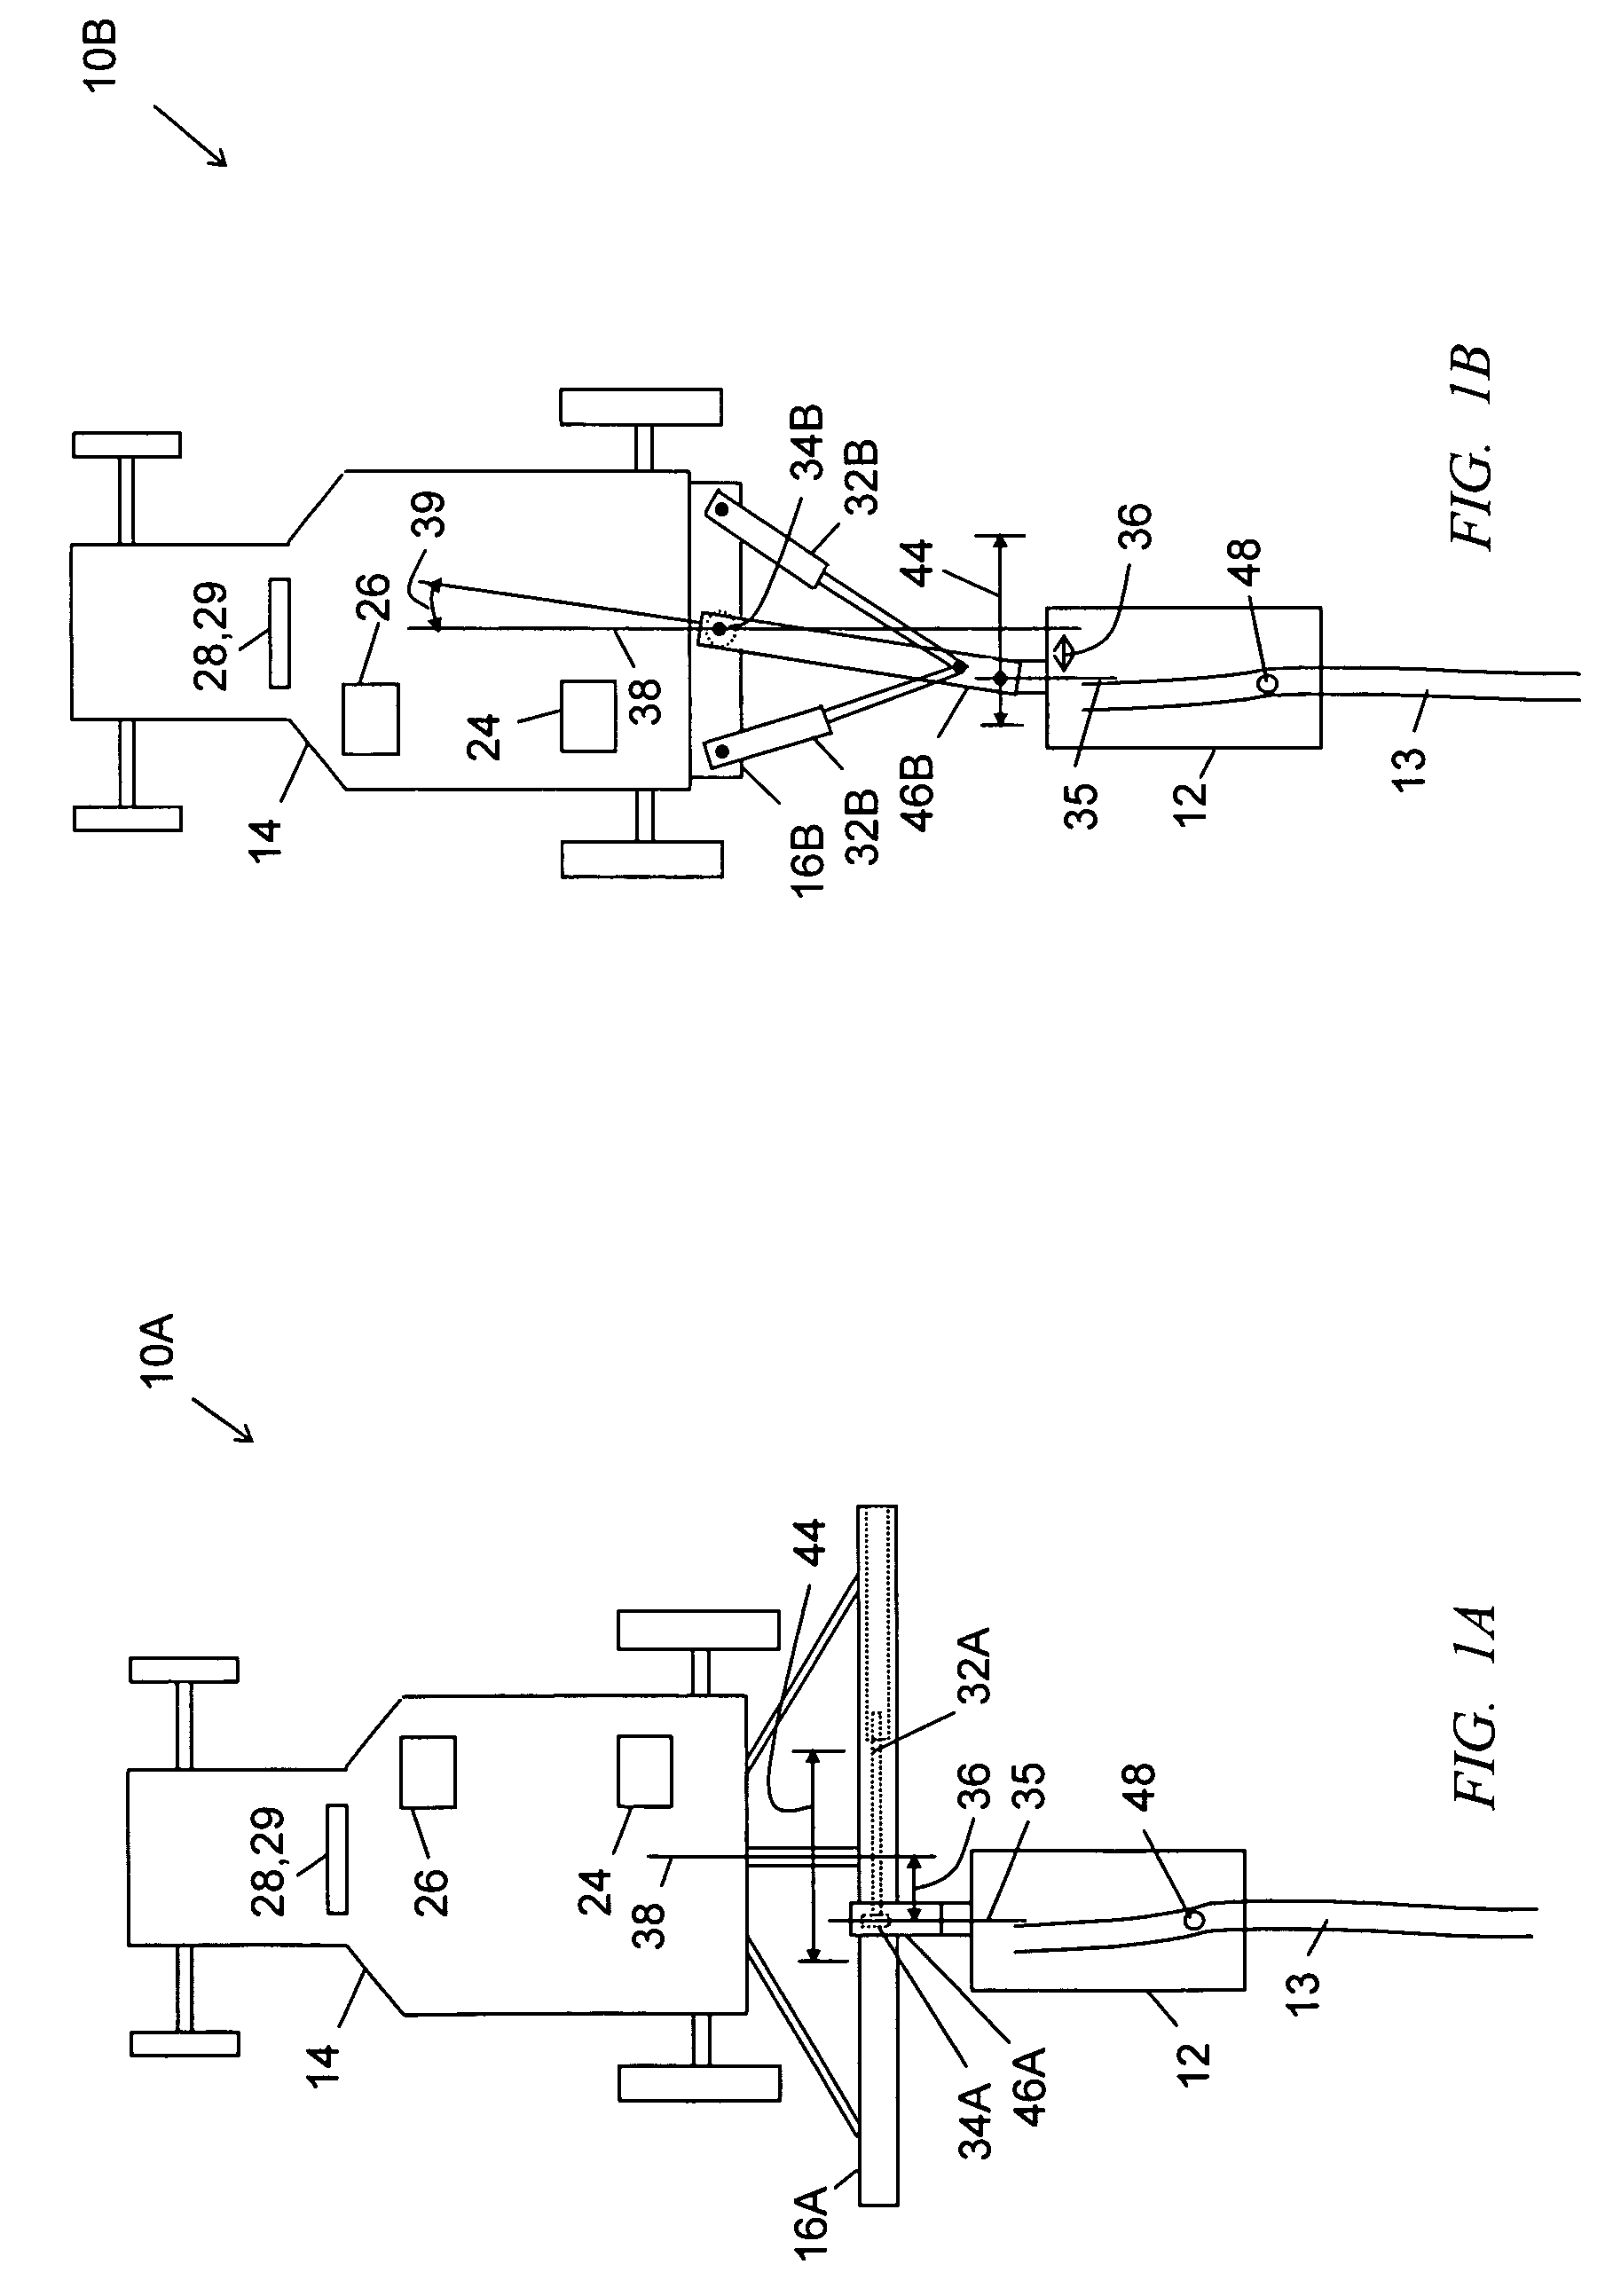 Method and apparatus for steering a farm implement to a path